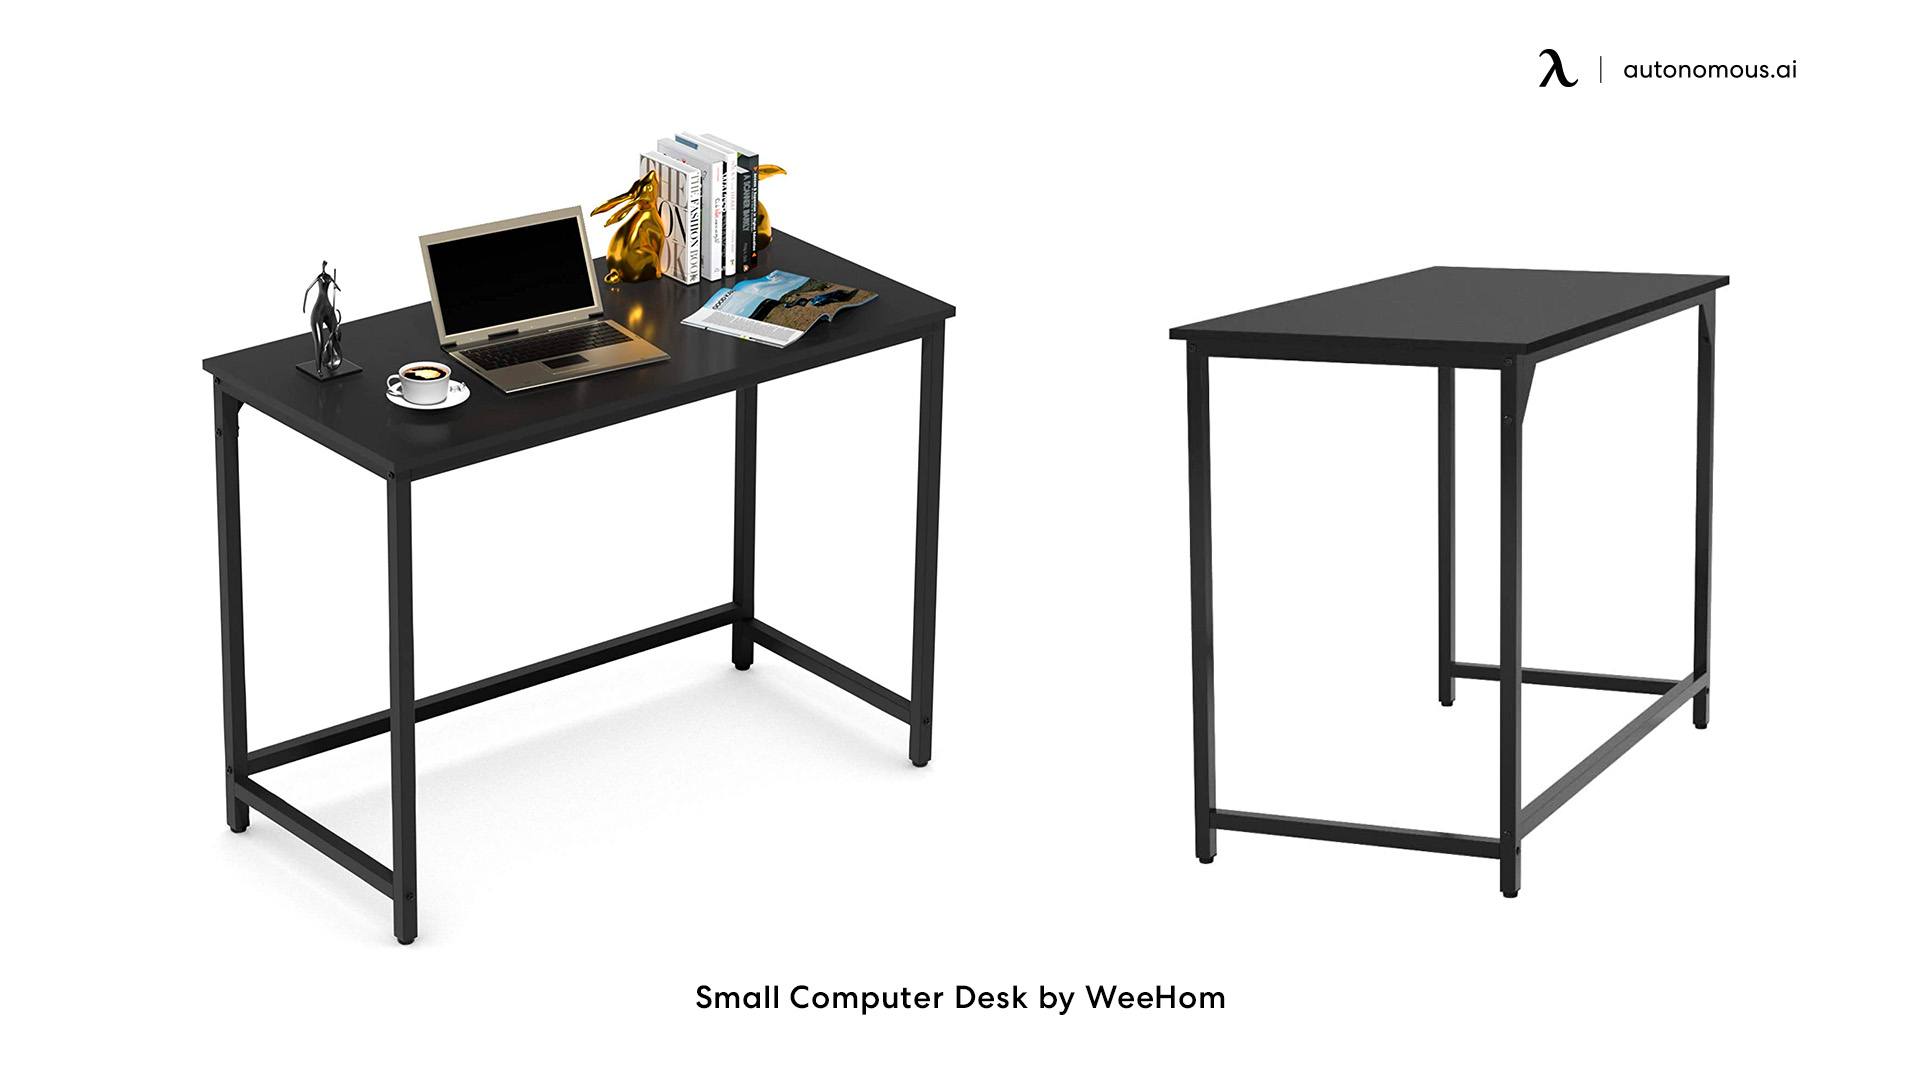 Small Computer Desk by WeeHom